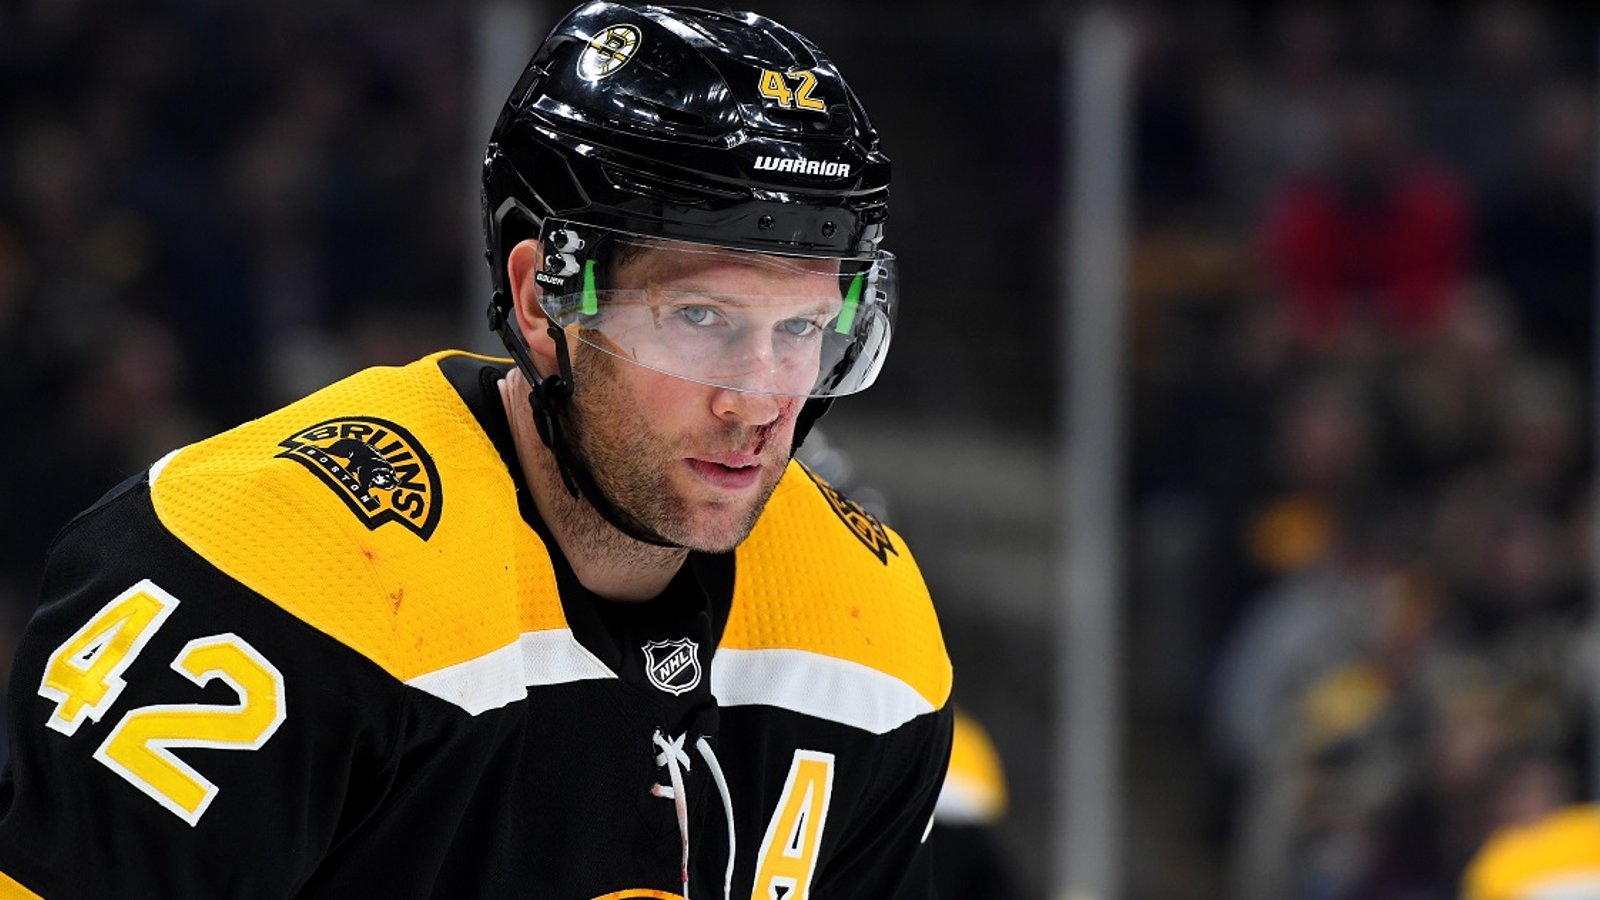 David Backes sends a message to the Bruins following his trade.